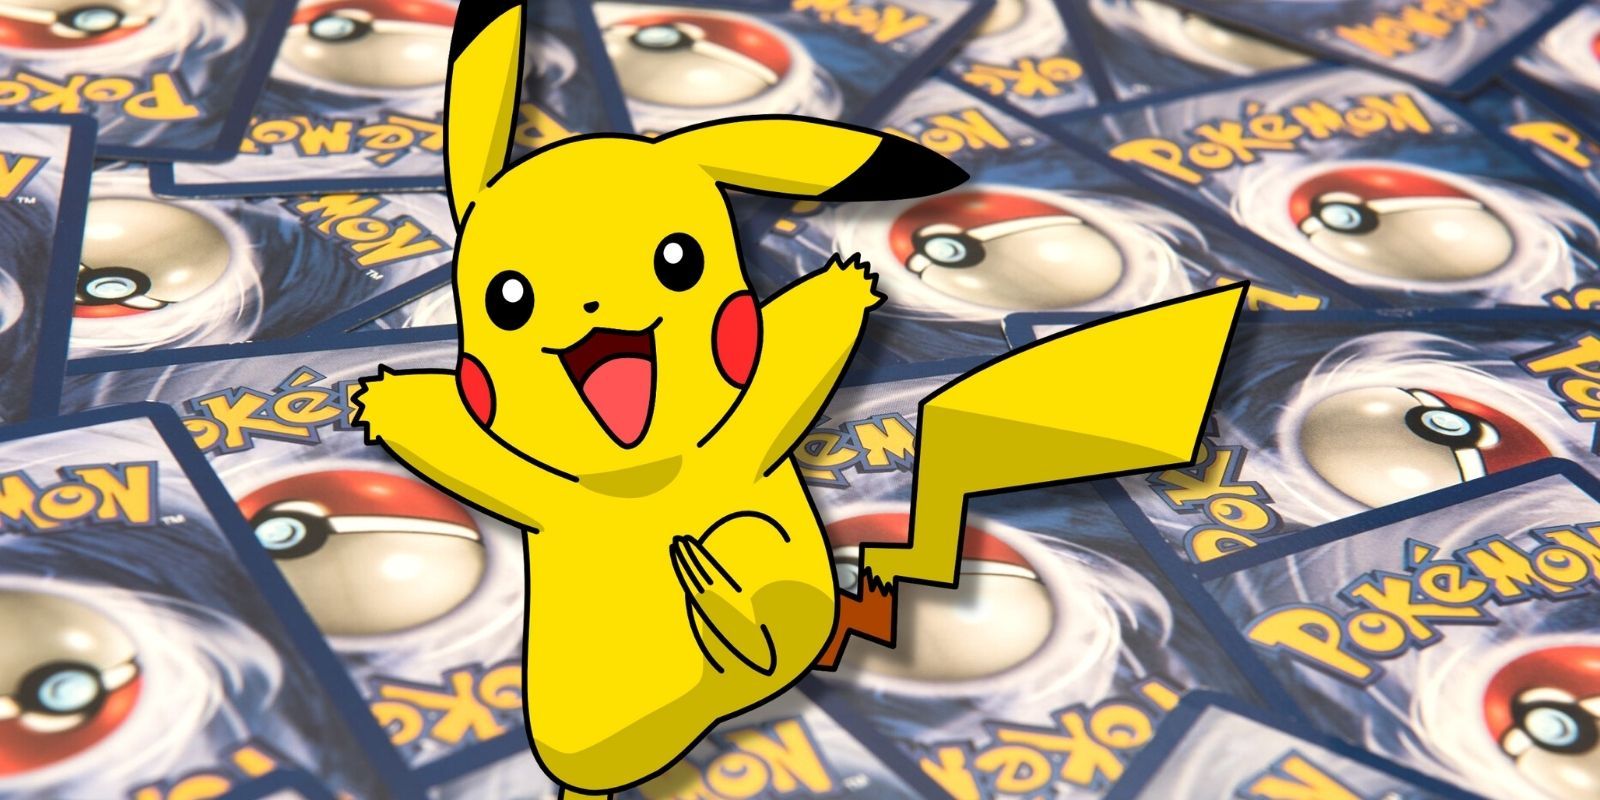 Pikachu atop a pile of Pokemon cards